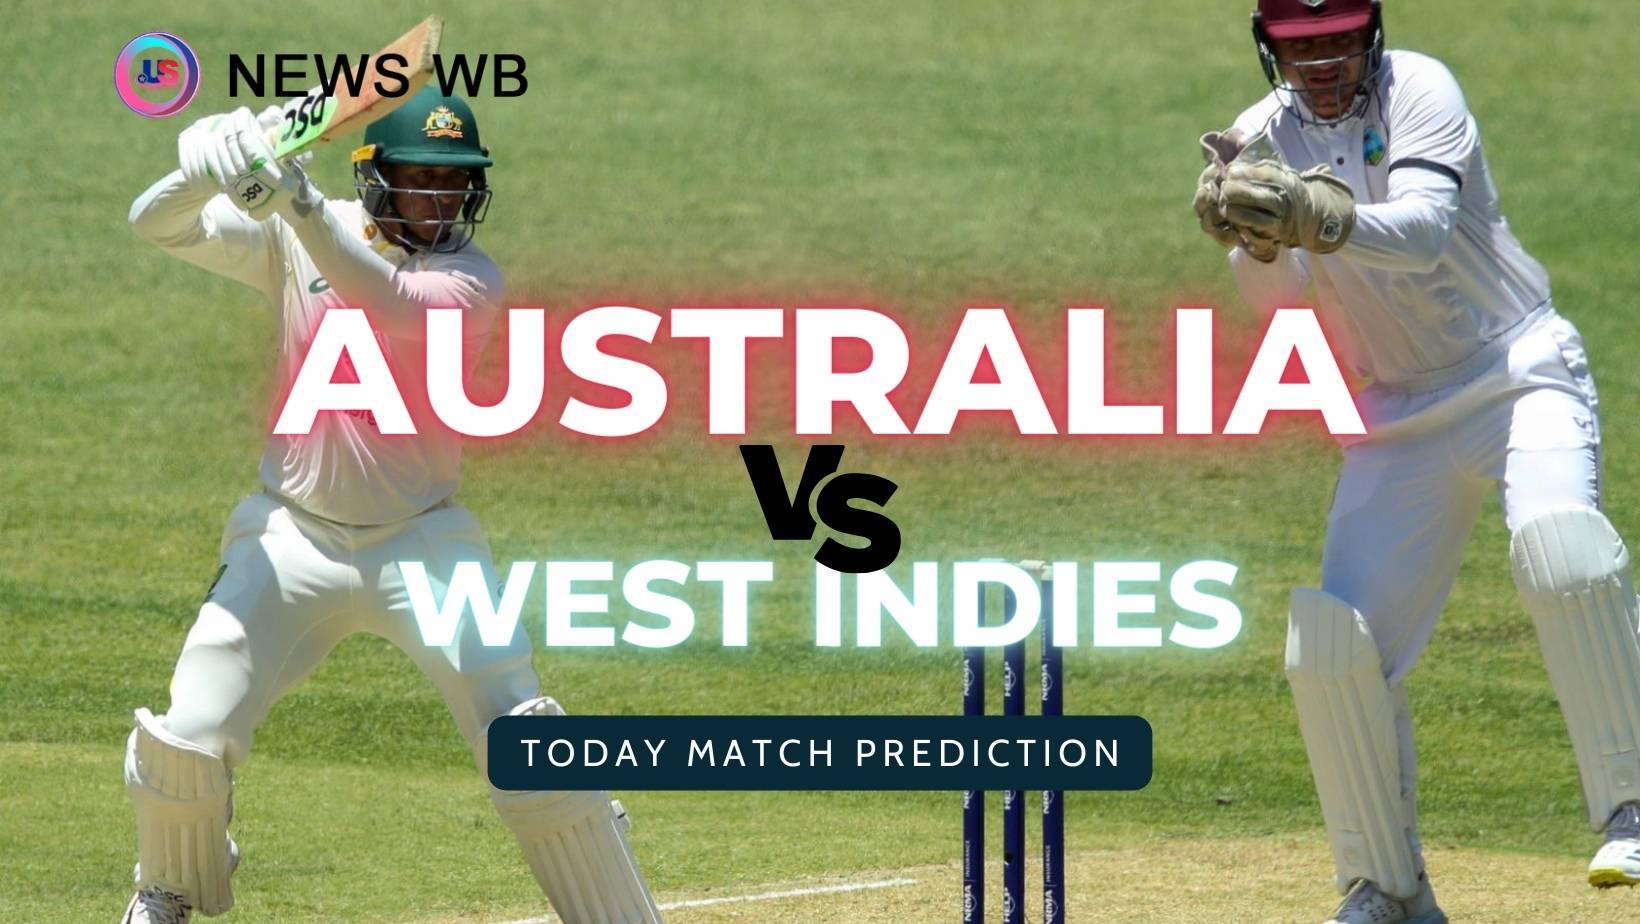 Today Match Prediction: AUS vs WI Dream11 Team, Australia vs West Indies 2nd Test Match, Who Will Win?